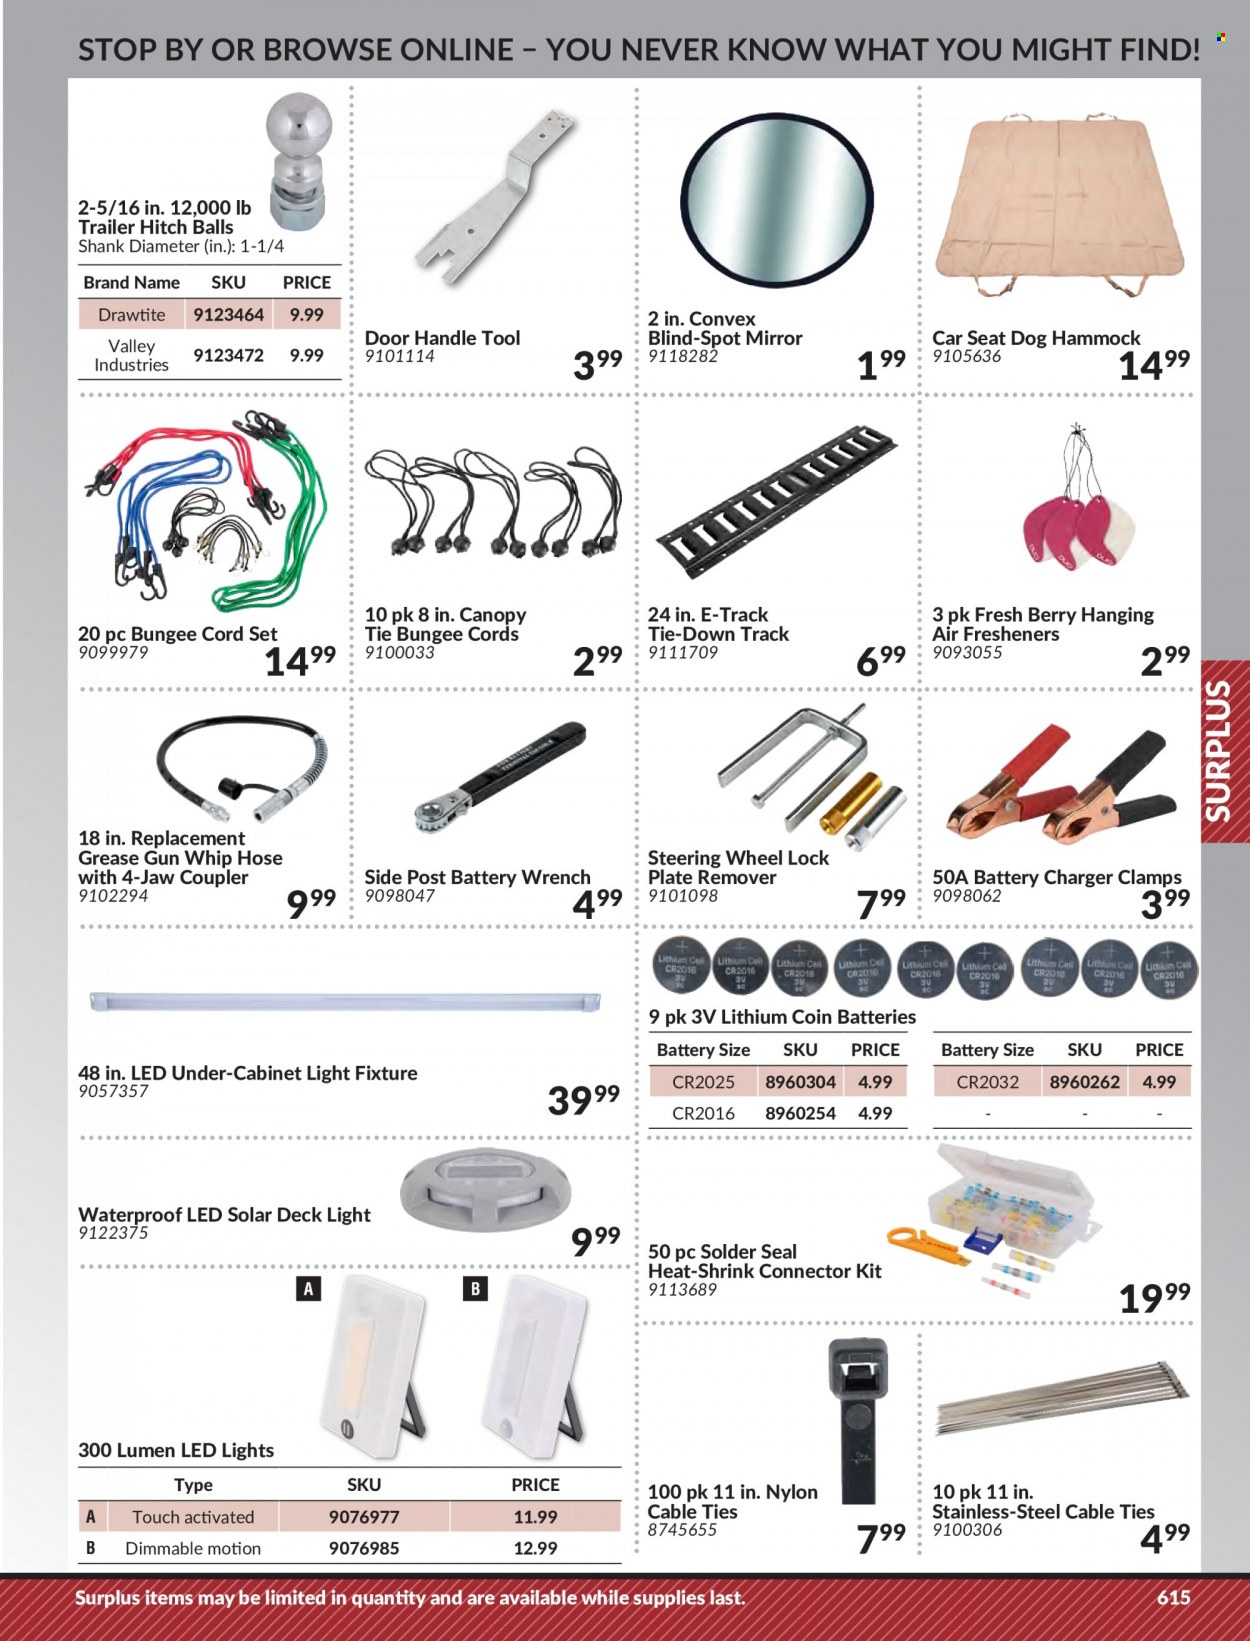 thumbnail - Princess Auto Flyer - Sales products - LED light, door handle, wrench, cabinet, cord set, trailer, bungee cords, hammock, battery charger, air freshener. Page 625.